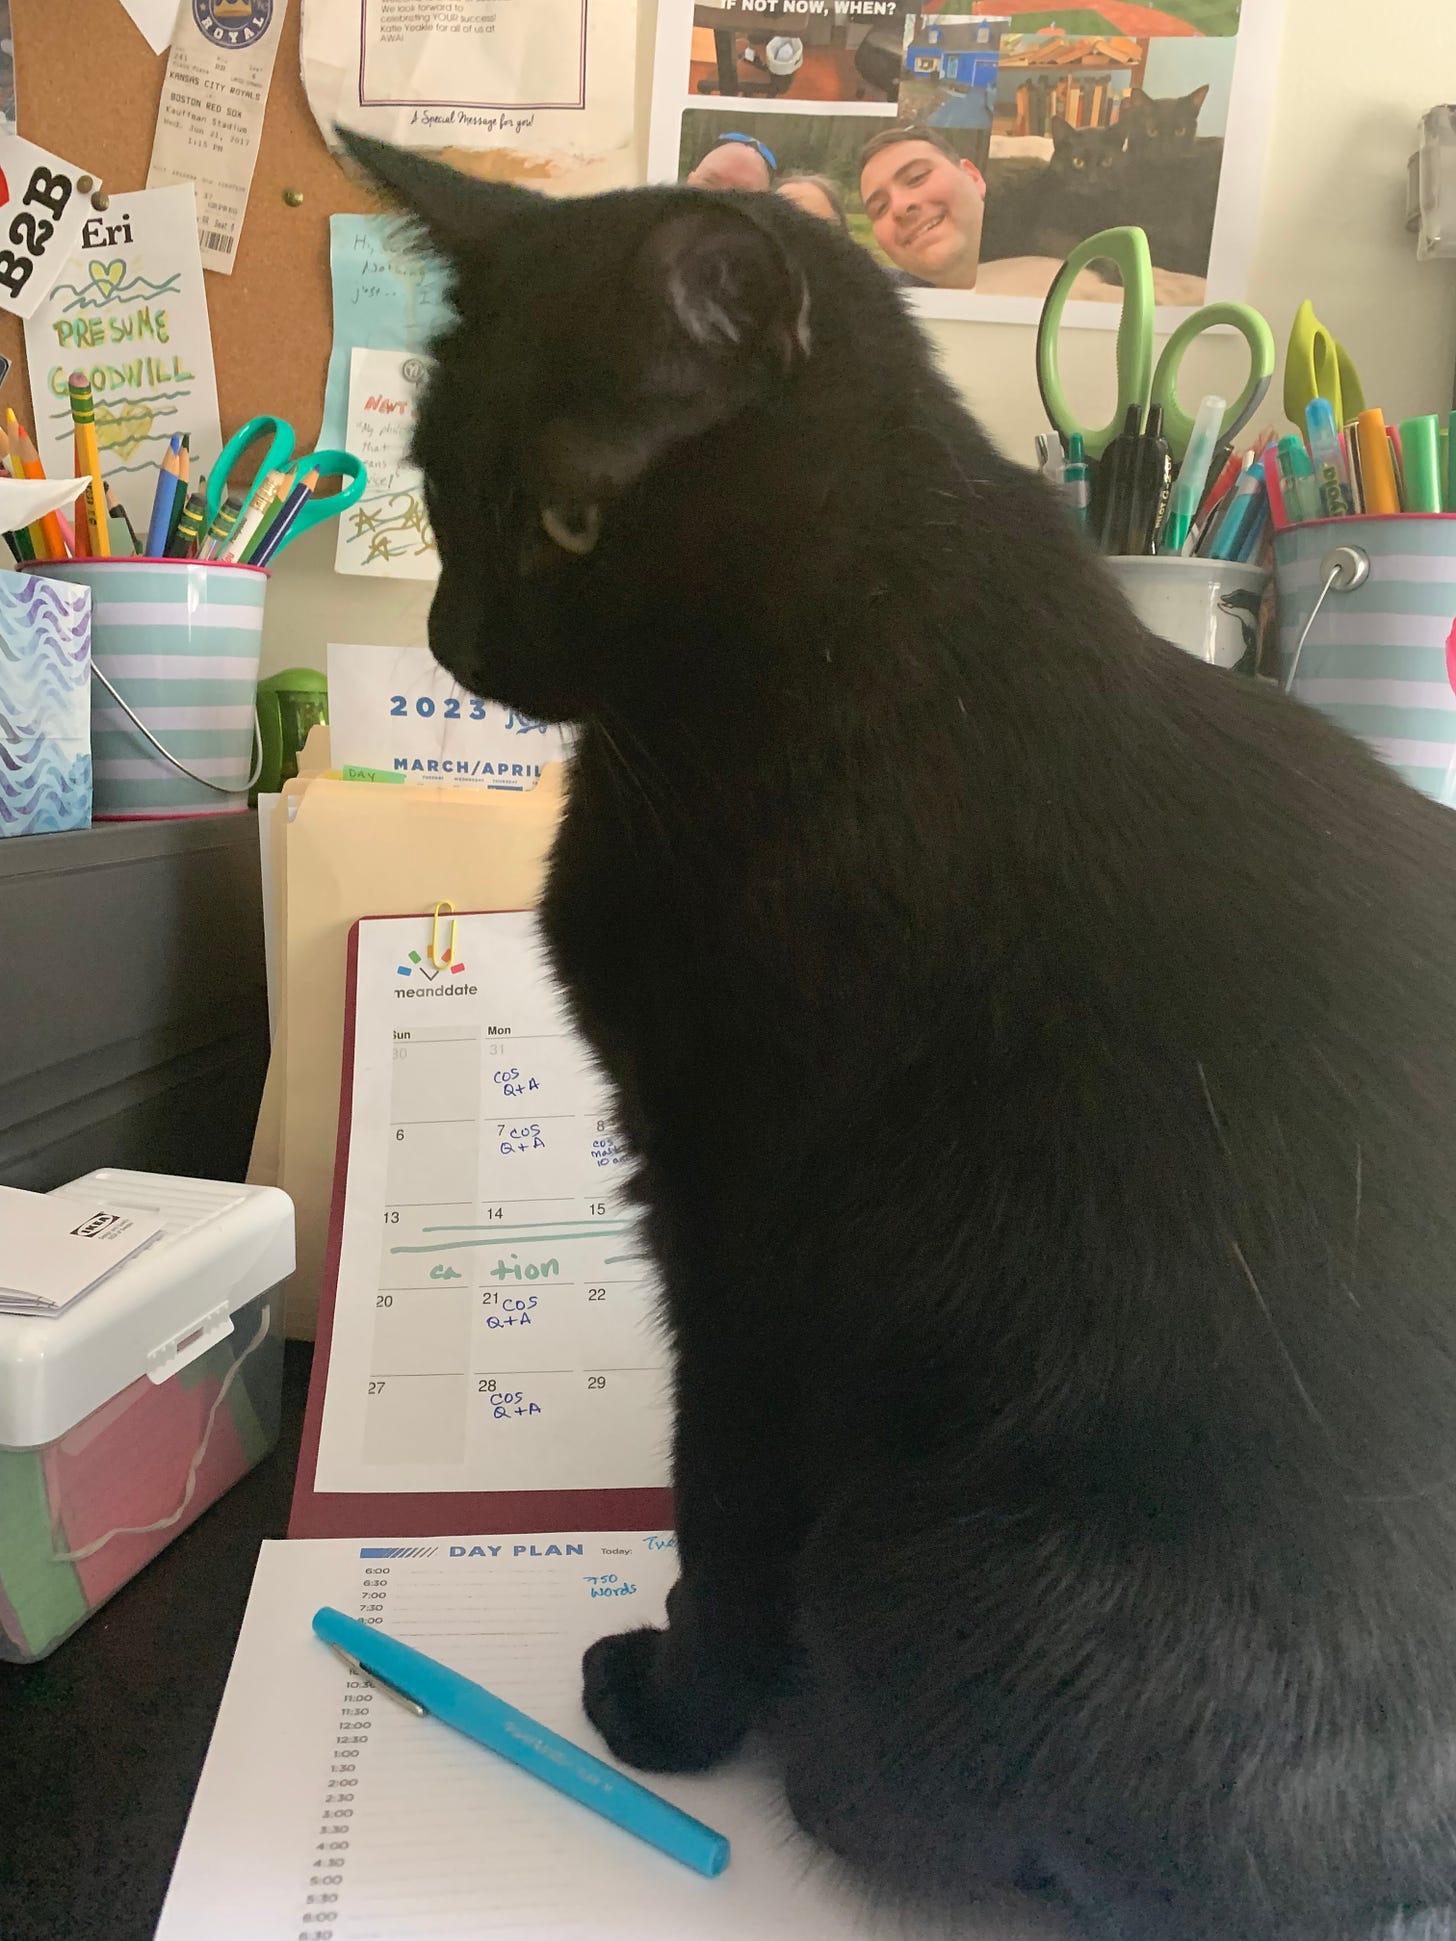 A black cat is on top of a day planner. There are office supplies and bulleting boards in the background.